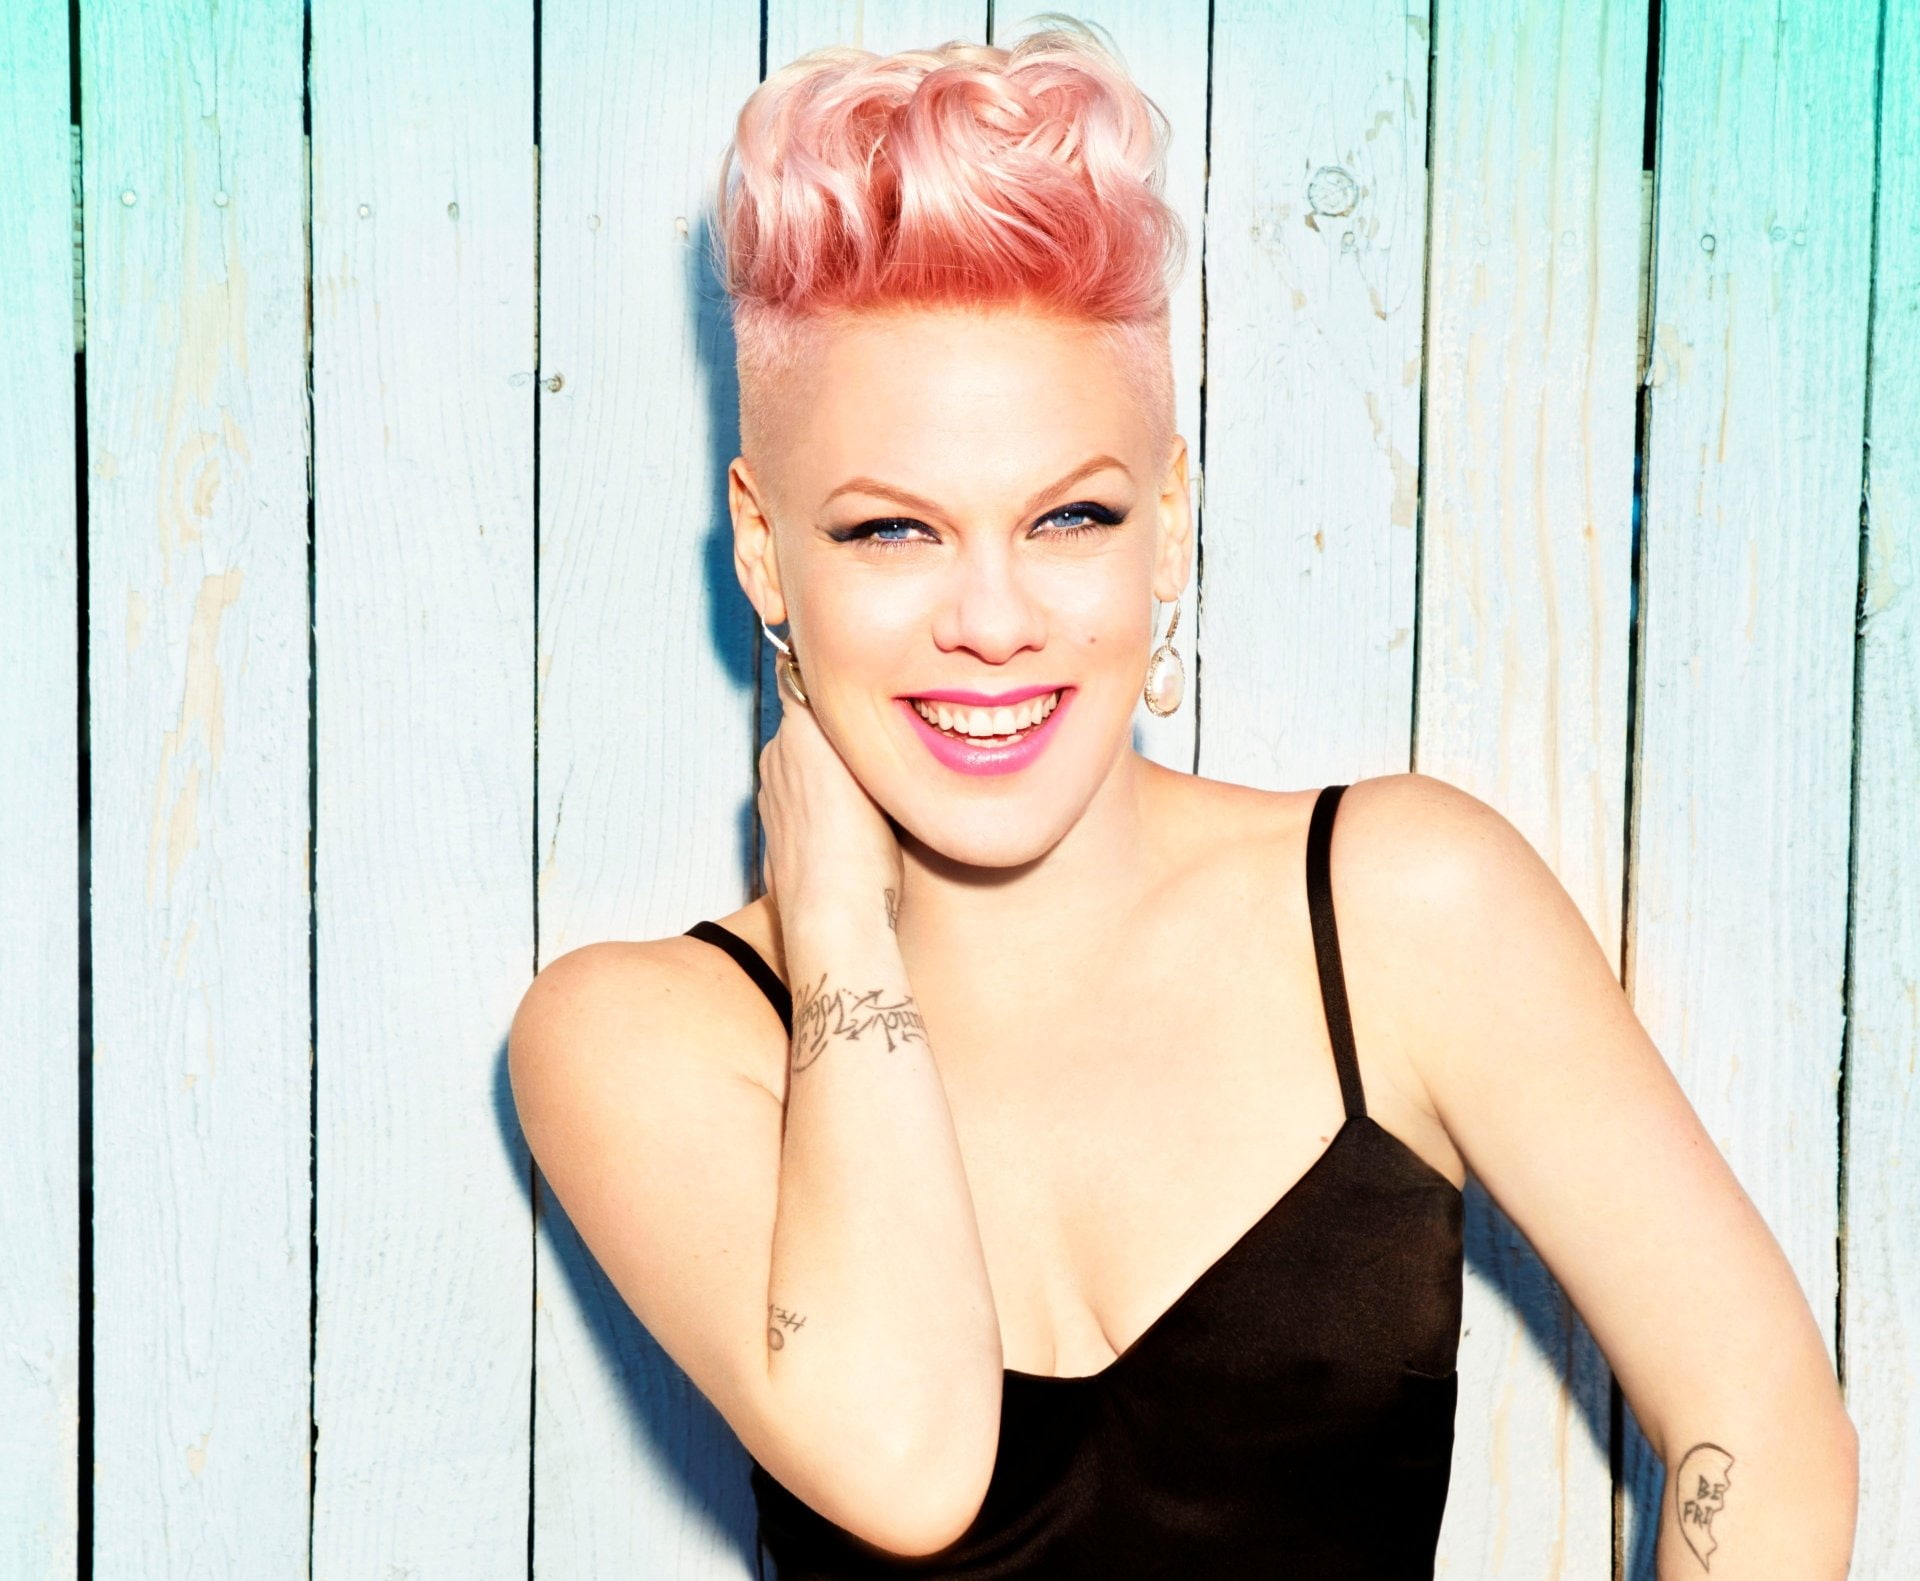 9. Pink-haired beauty with captivating blue eyes - wide 5